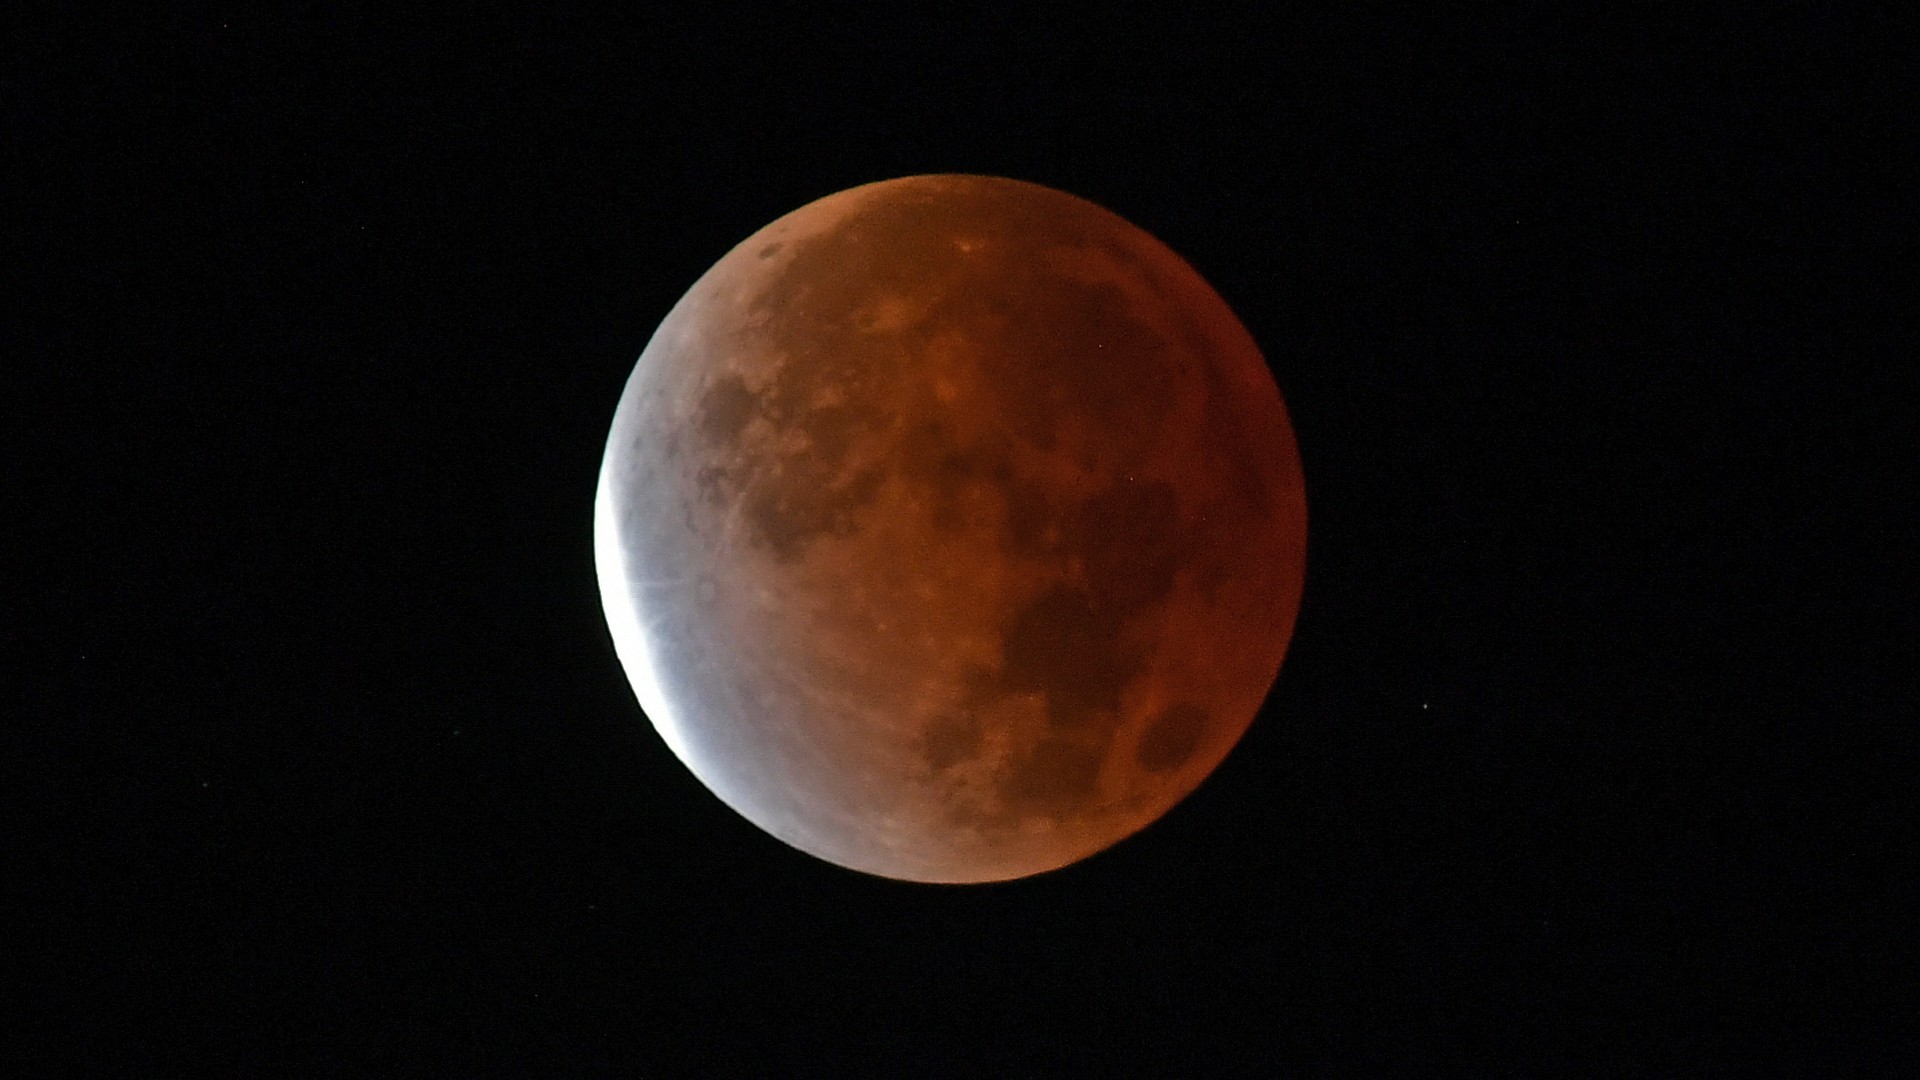 The Full Hunter's Moon experiences a partial lunar eclipse tomorrow. Here's what to expect